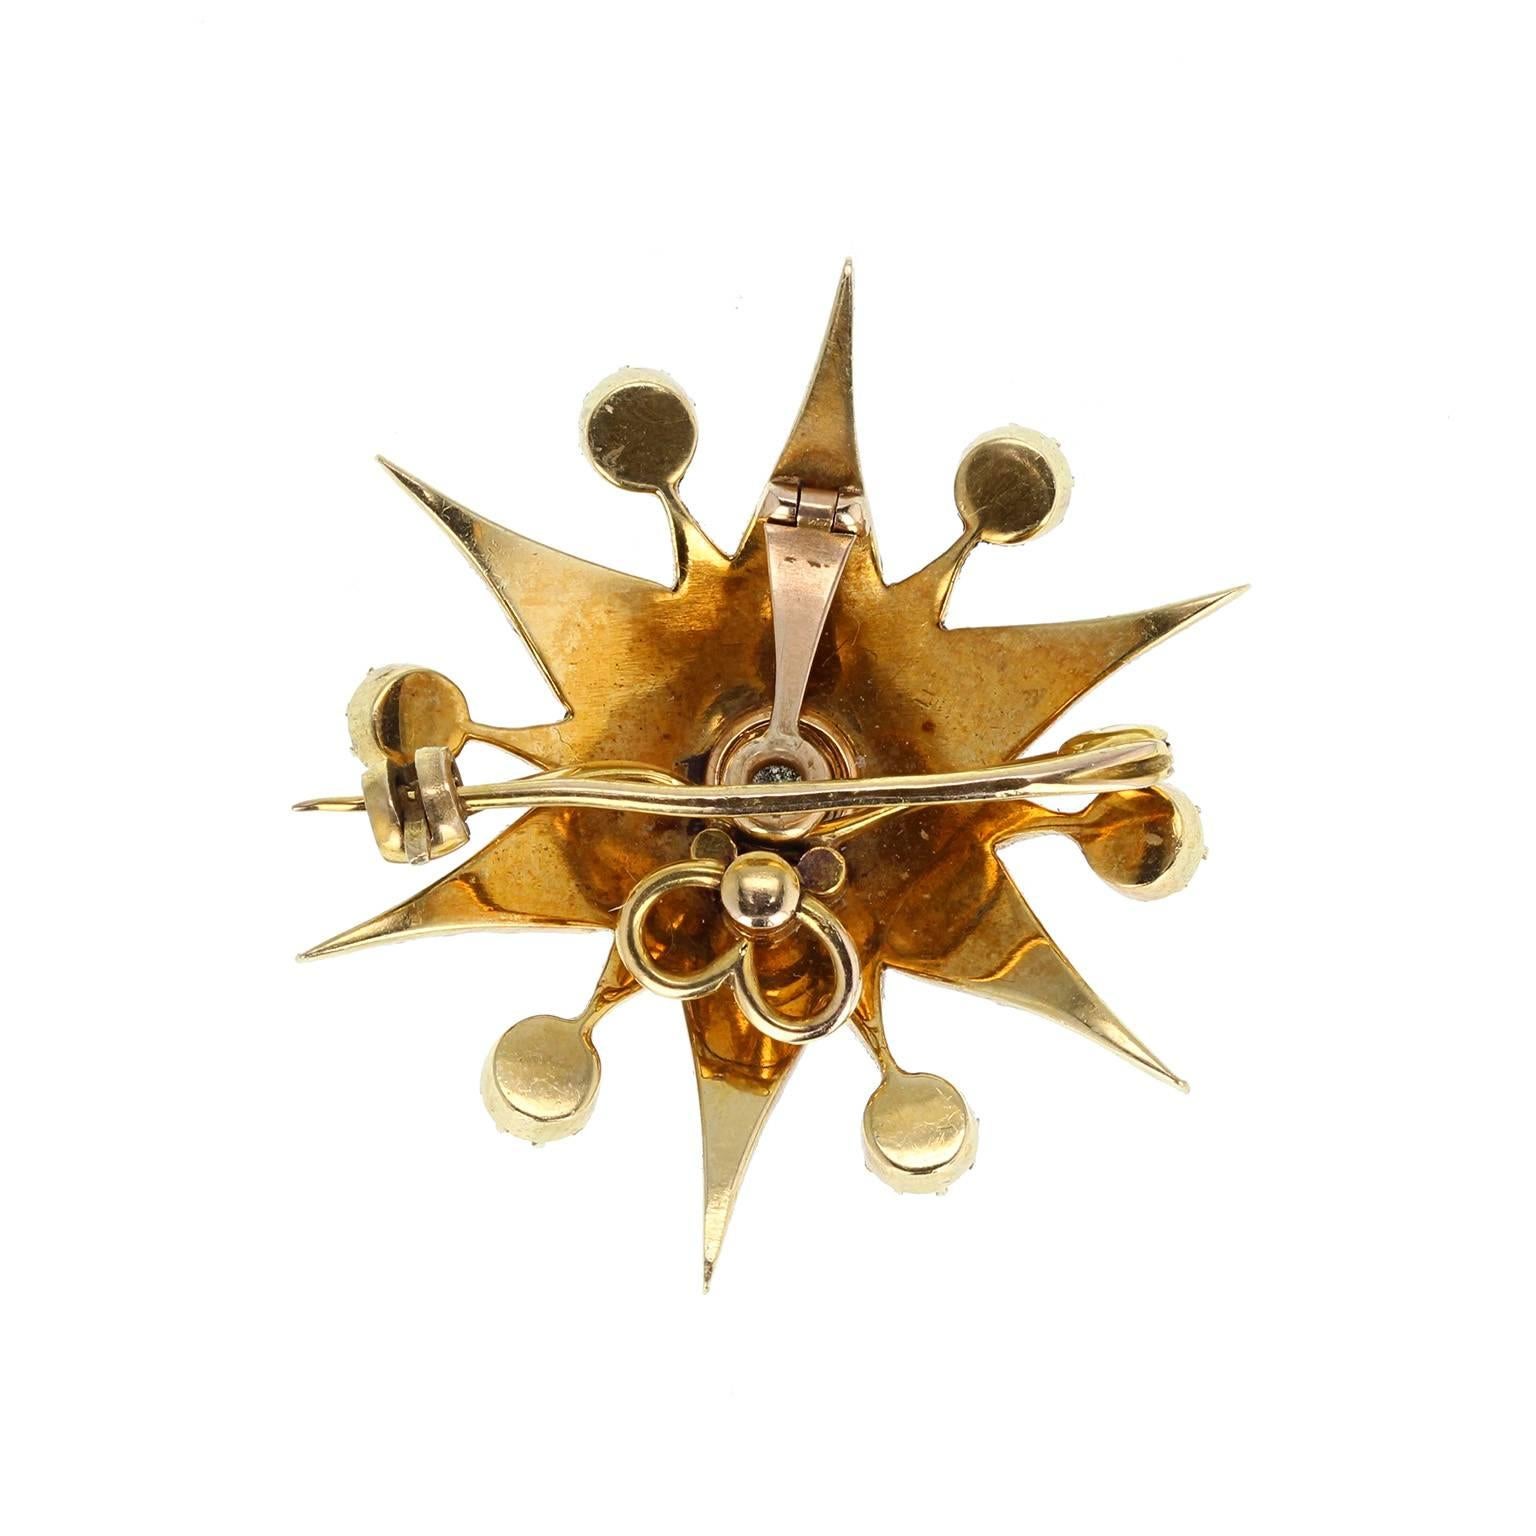 A beautiful antique brooch crafted in 18 carat yellow gold in a starburst style. Pave-set with split pearls, graduating in size, with six 'satellite' pearls radiating between each point. A single old mine-cut diamond sits at the centre. With